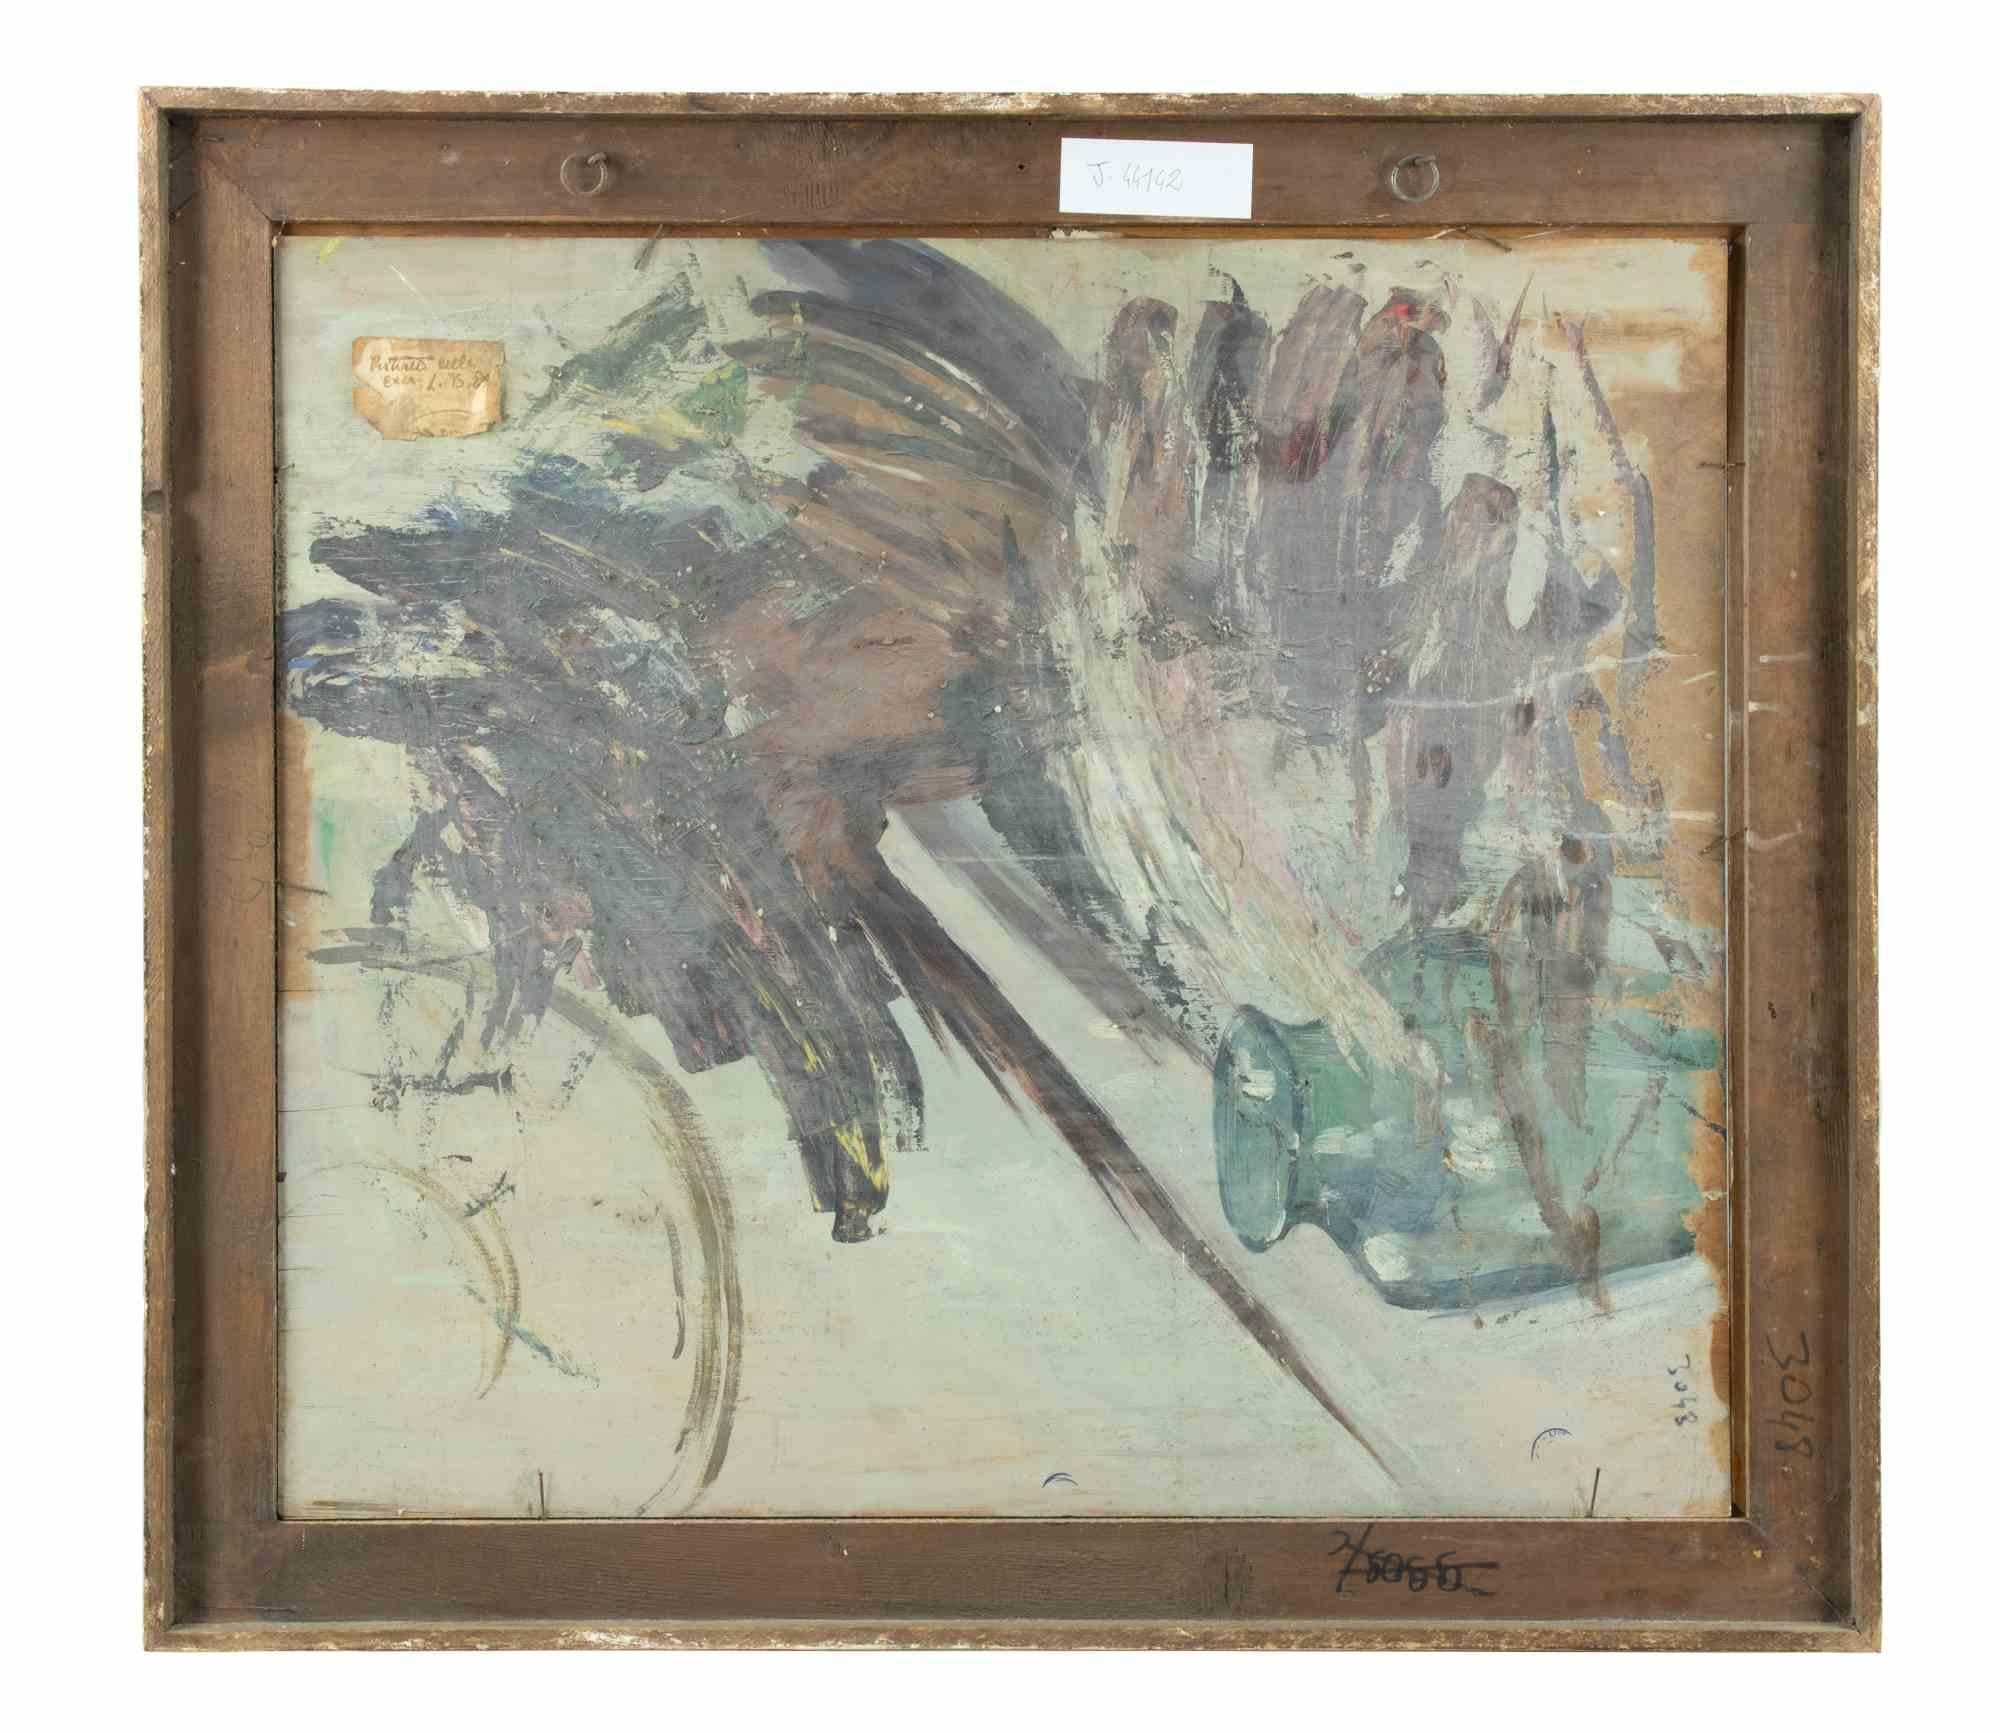 Woman is an original modern artwork realized by Eliseu Visconti (1866-1944) in 1930.

Mixed colored oil painting.

Hand signed and dated on the lower margin.